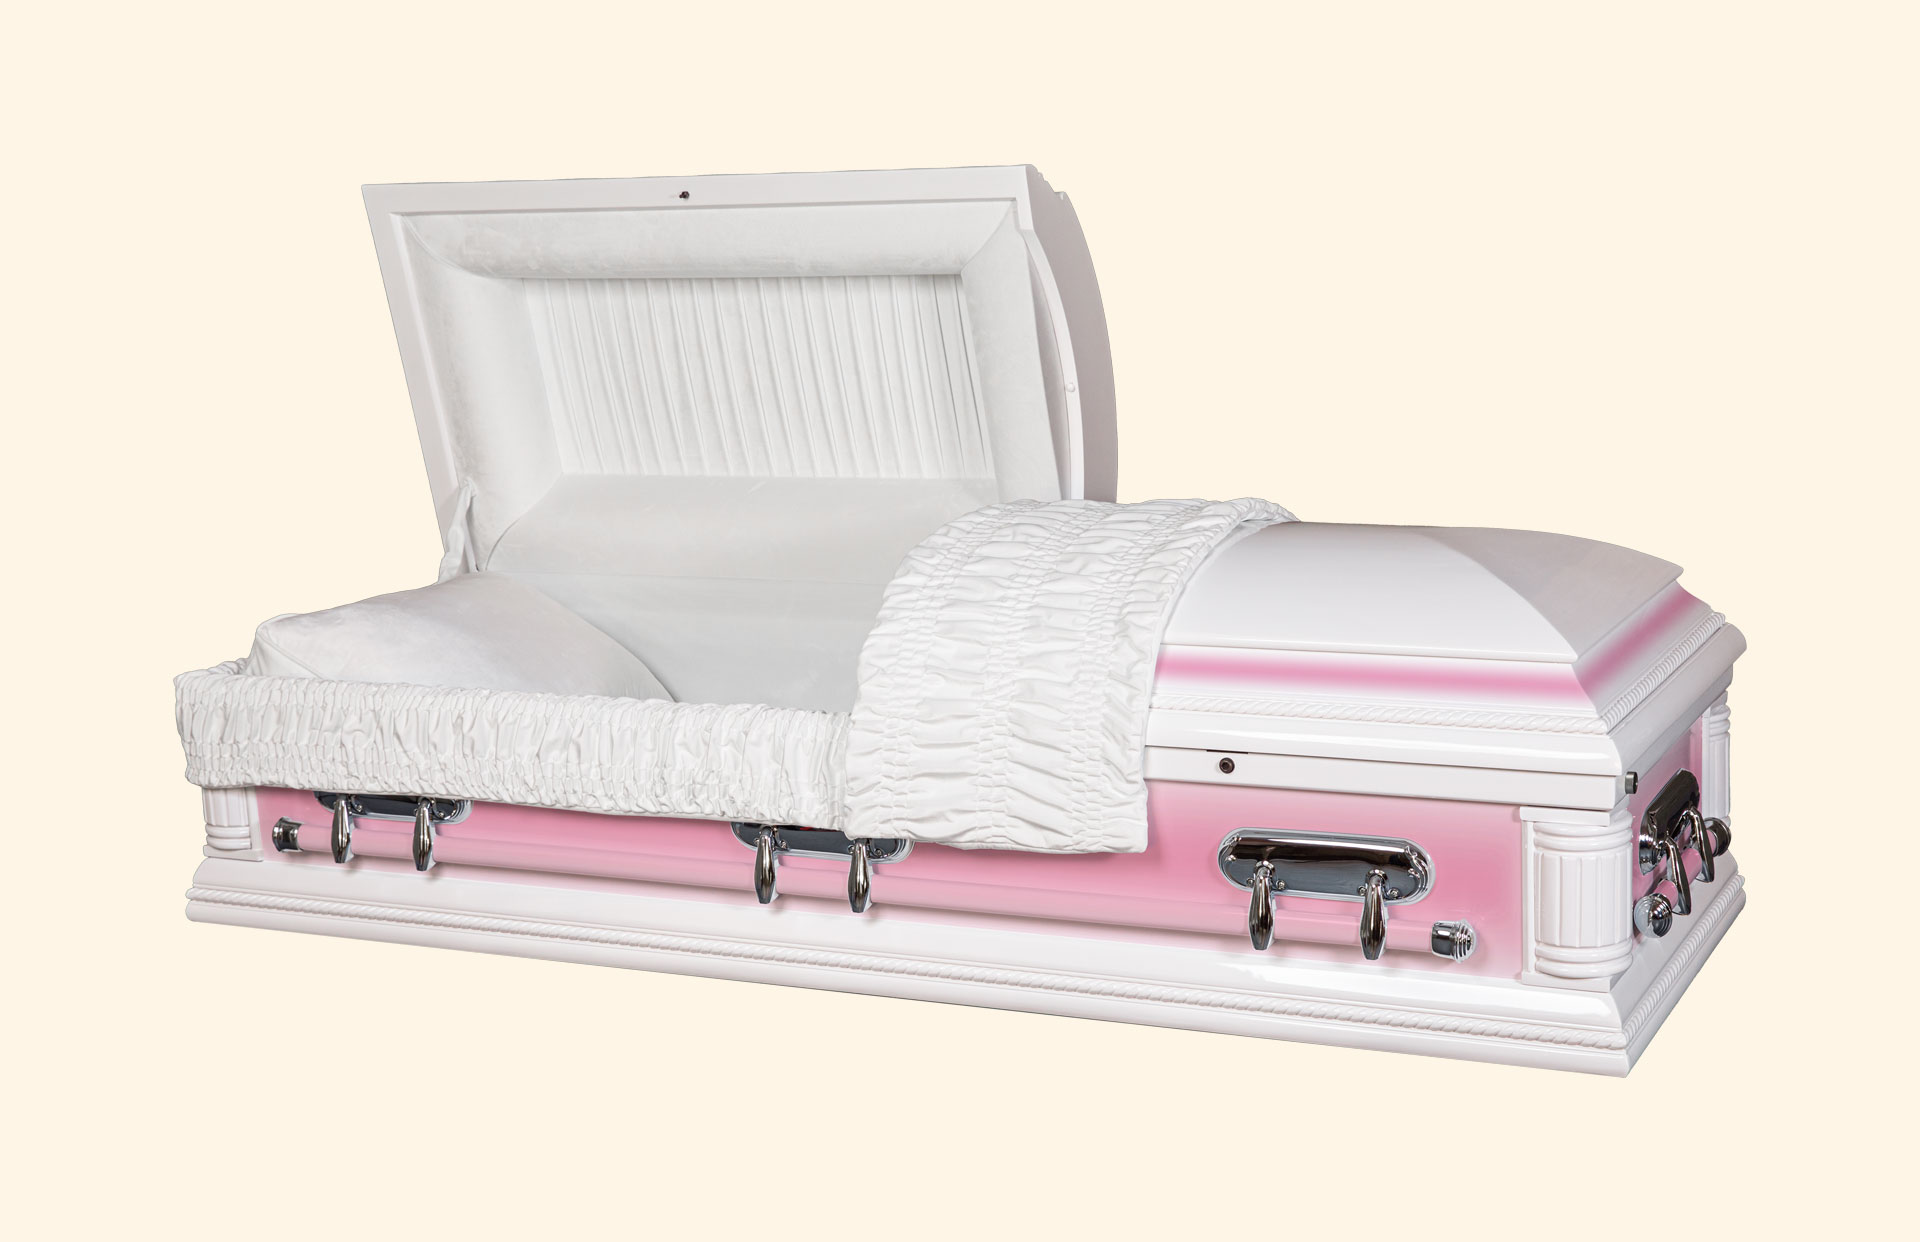 Purity Solid Pink Wood American Casket standard white interior